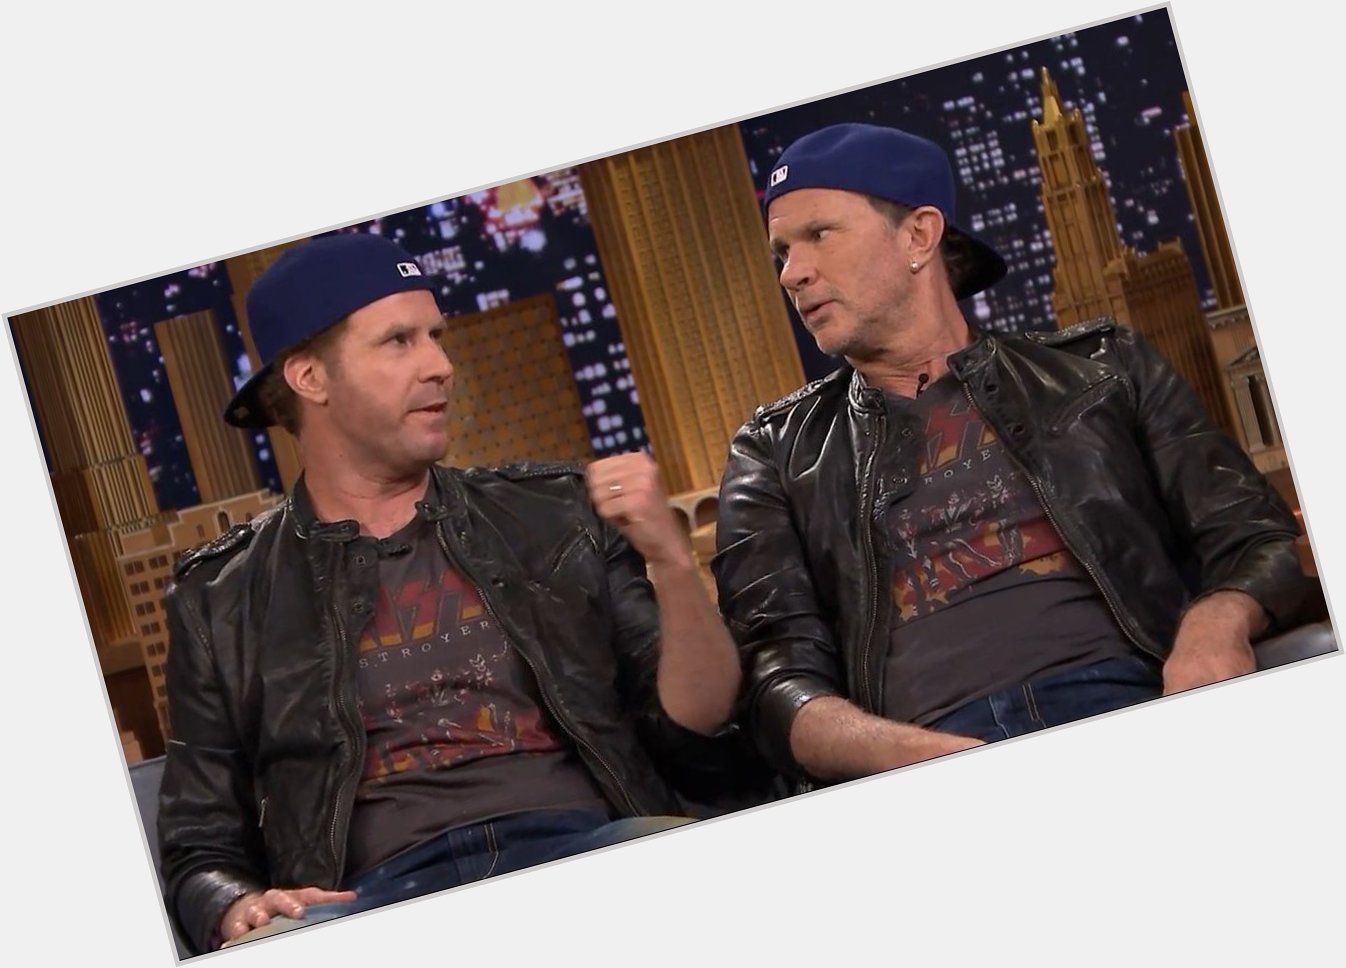 Happy Birthday to Will Ferr...err Chili Peppers drummer Chad Smith! 